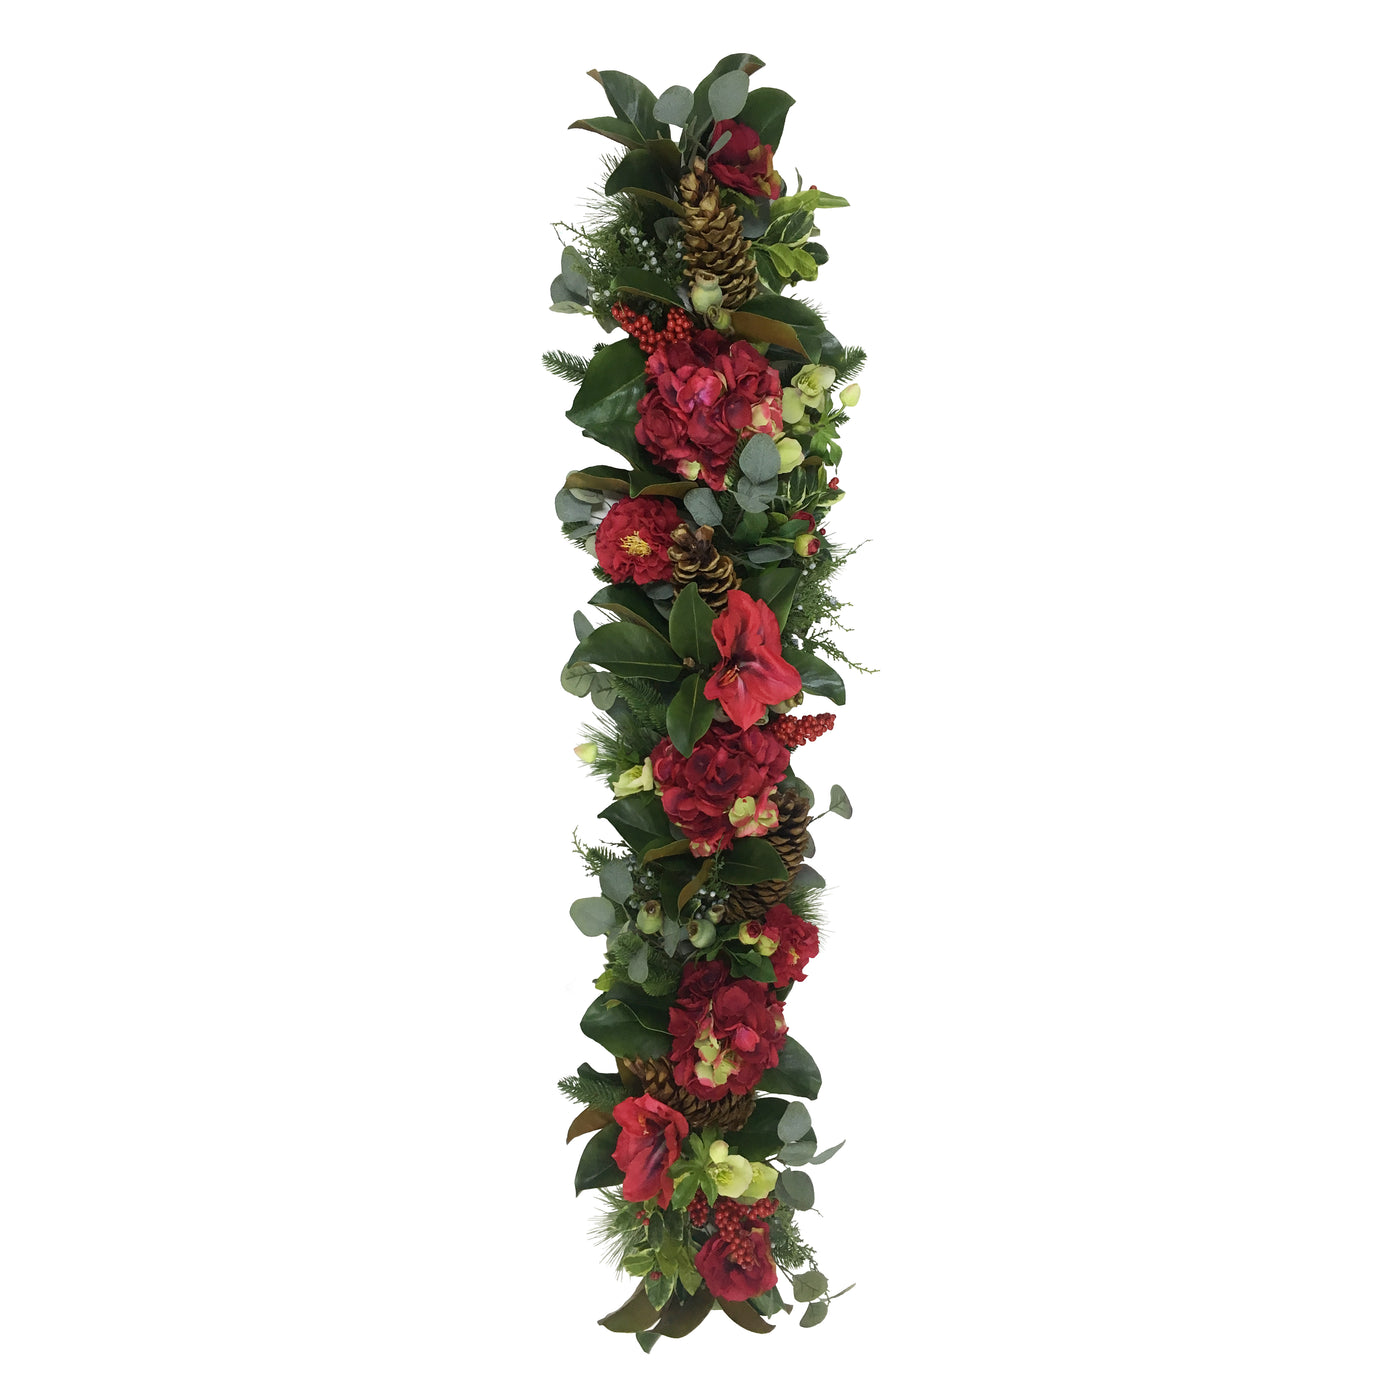 Beautiful upscale faux garland for the holidays